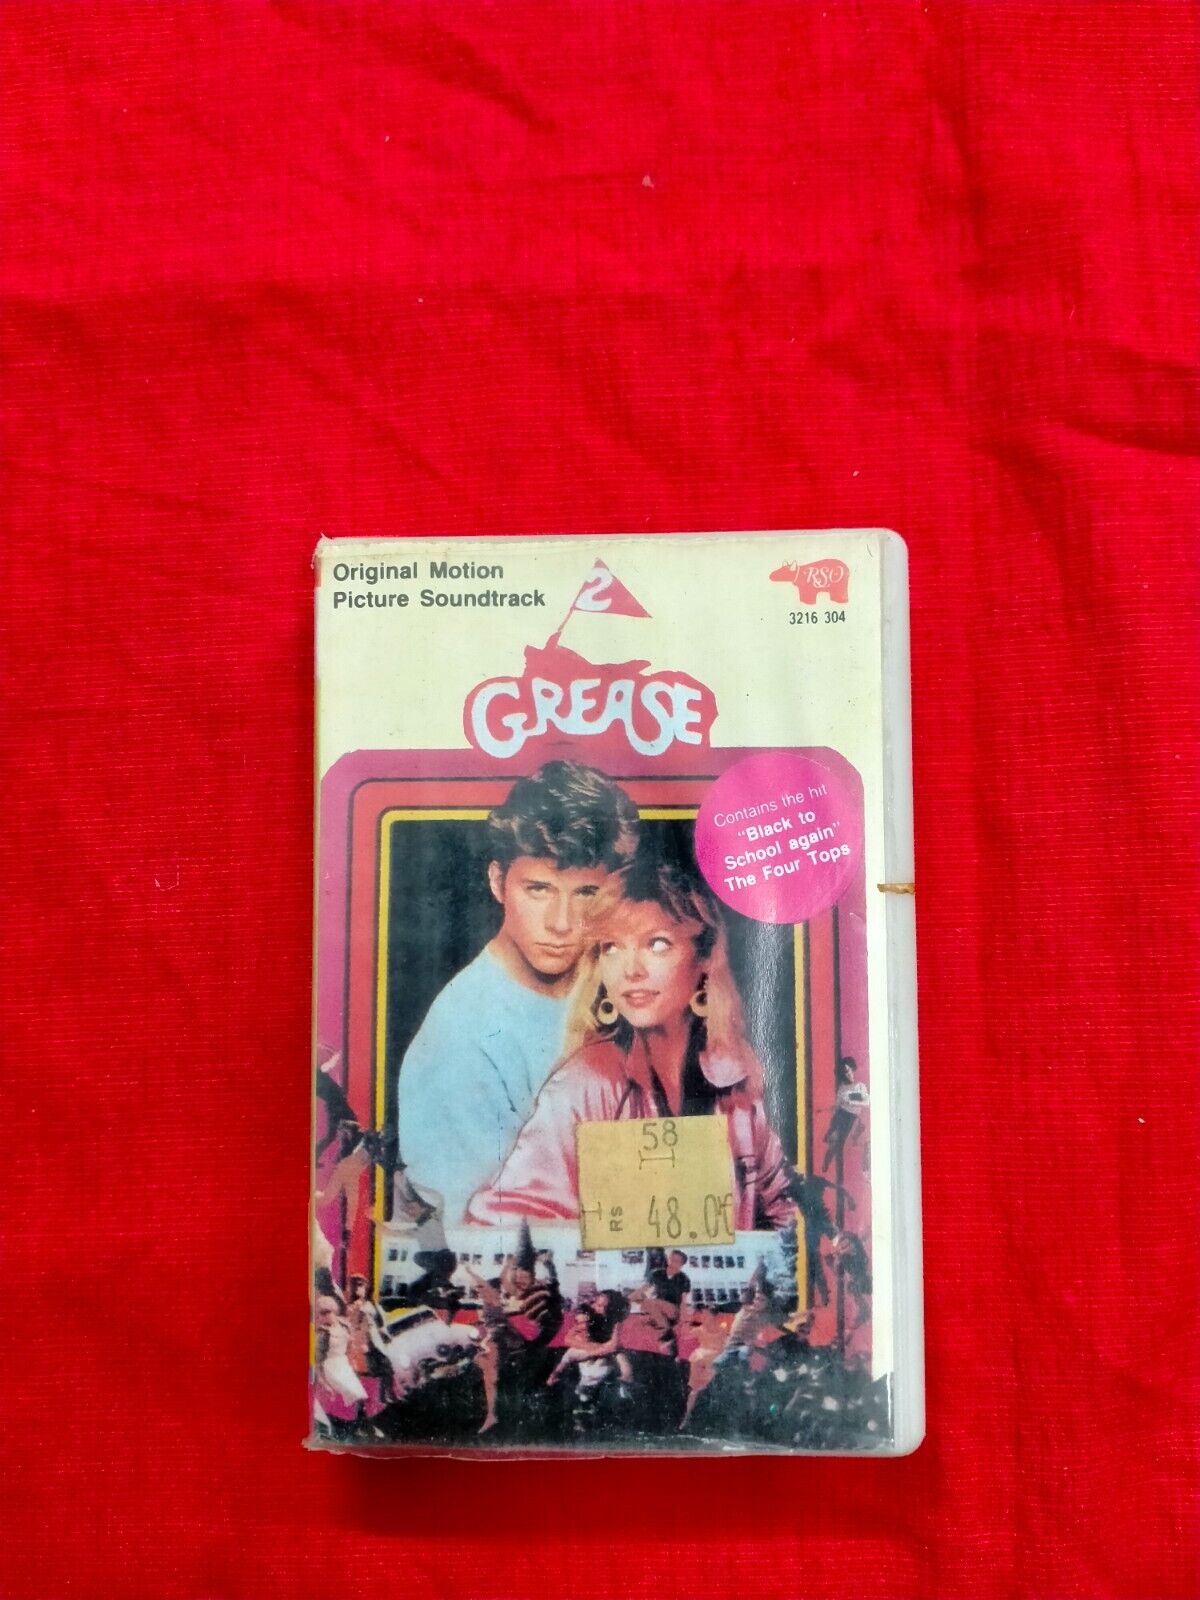 Grease 2 Original Motion Picture Soundtrack Cassette tape INDIA Clamshell 1992